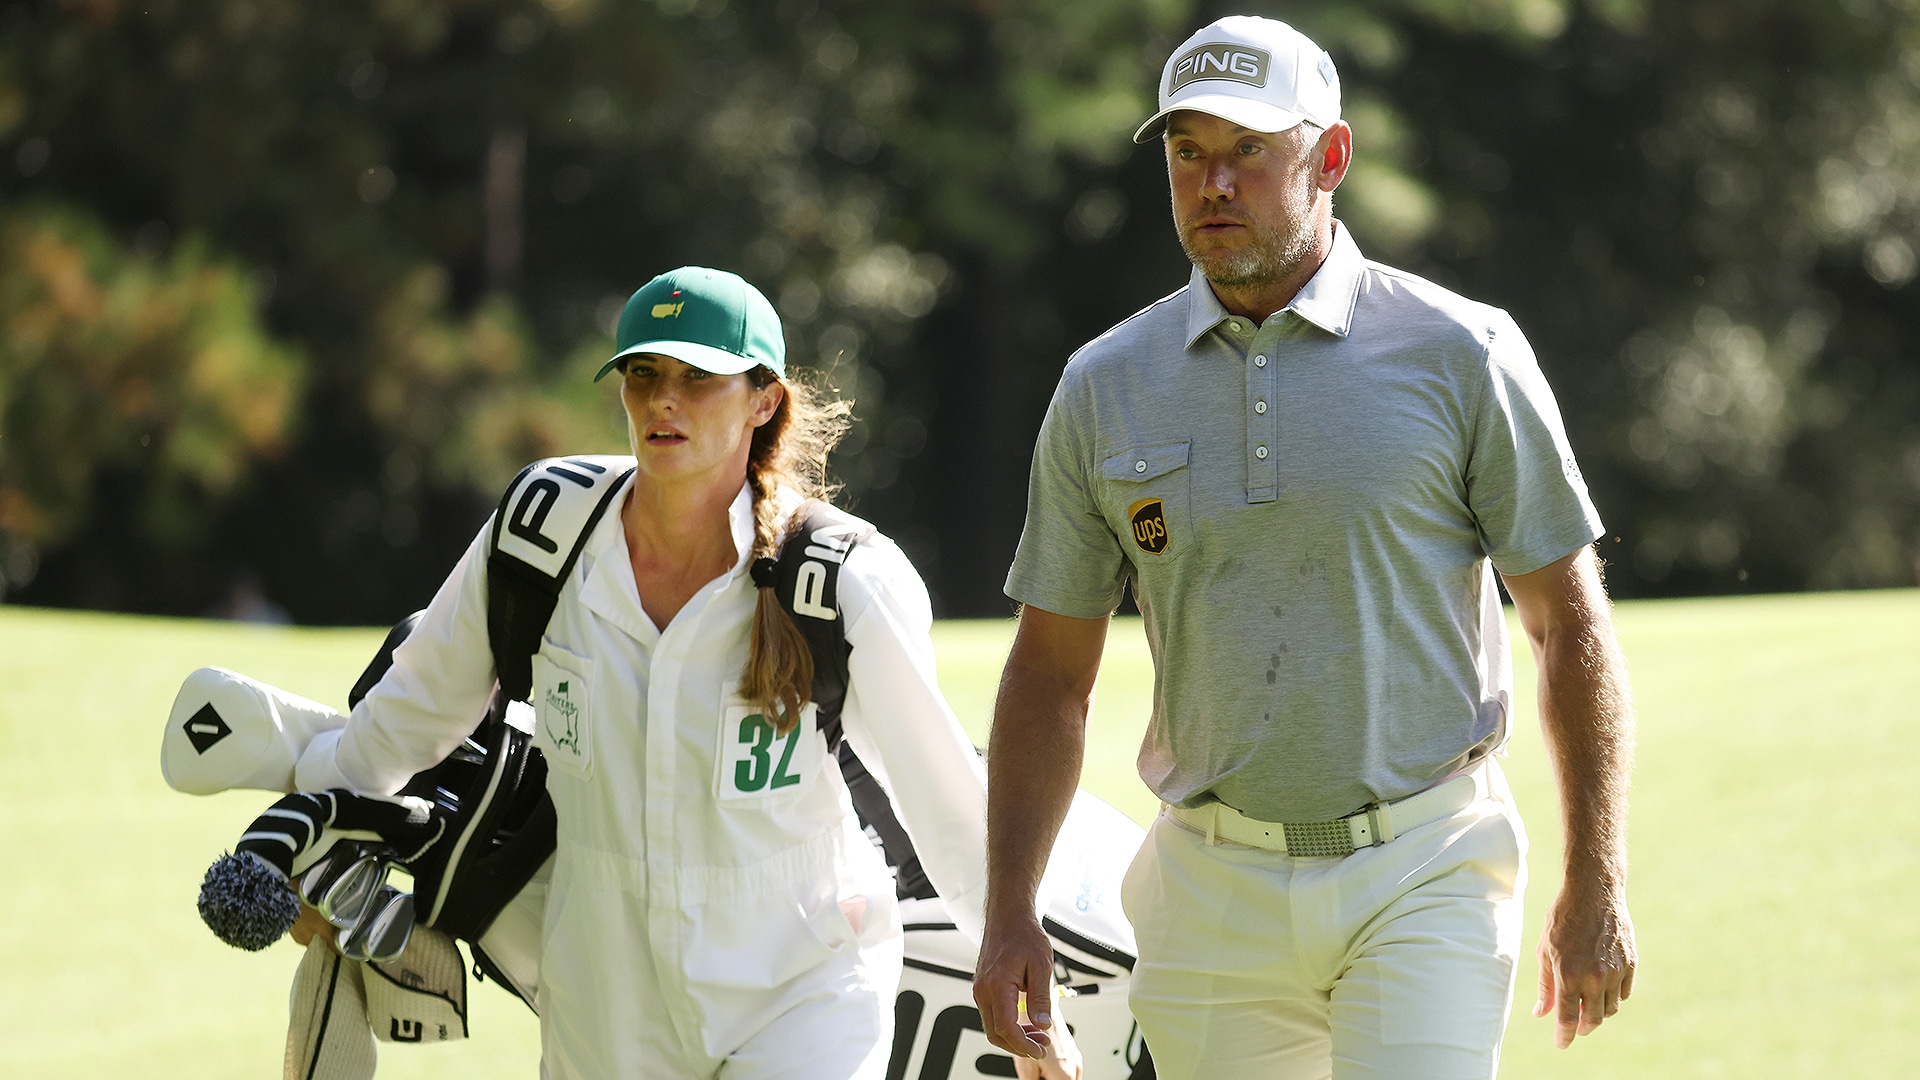 Back at ‘favorite course in the world,’ Lee Westwood back in major mix at Masters